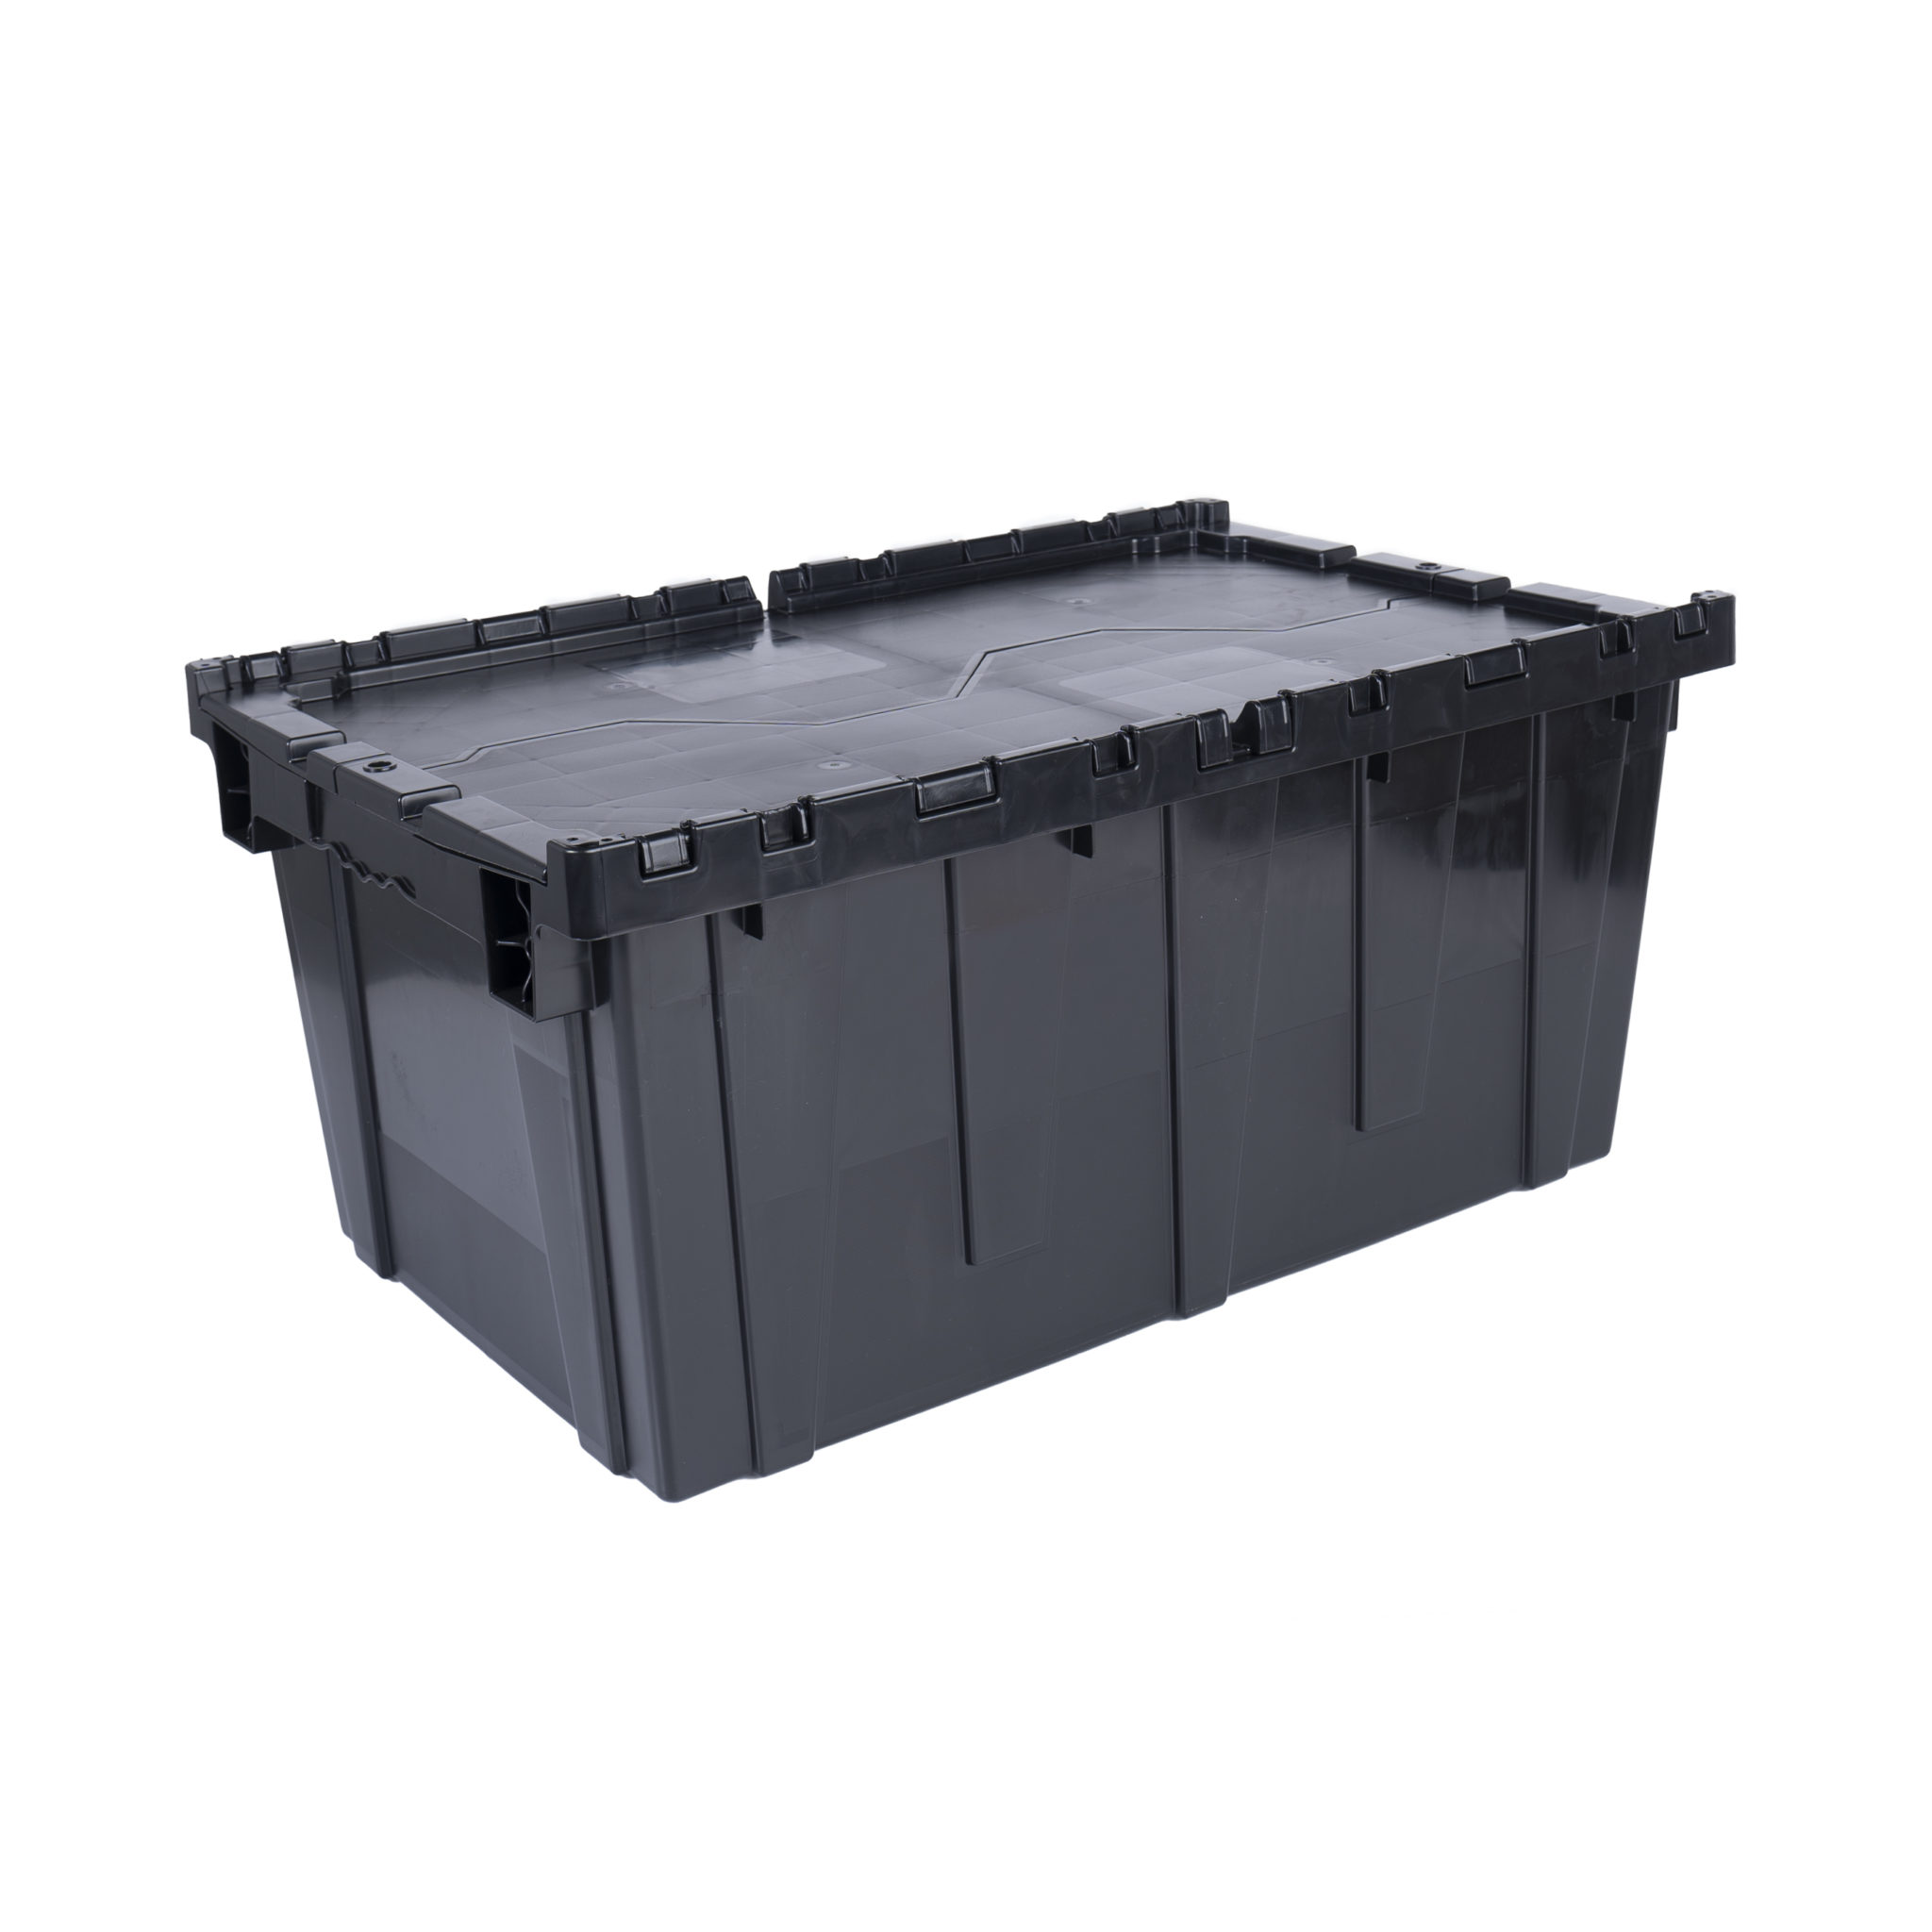 27 x 17 x 12 – Handheld Attached Lid Container Rental